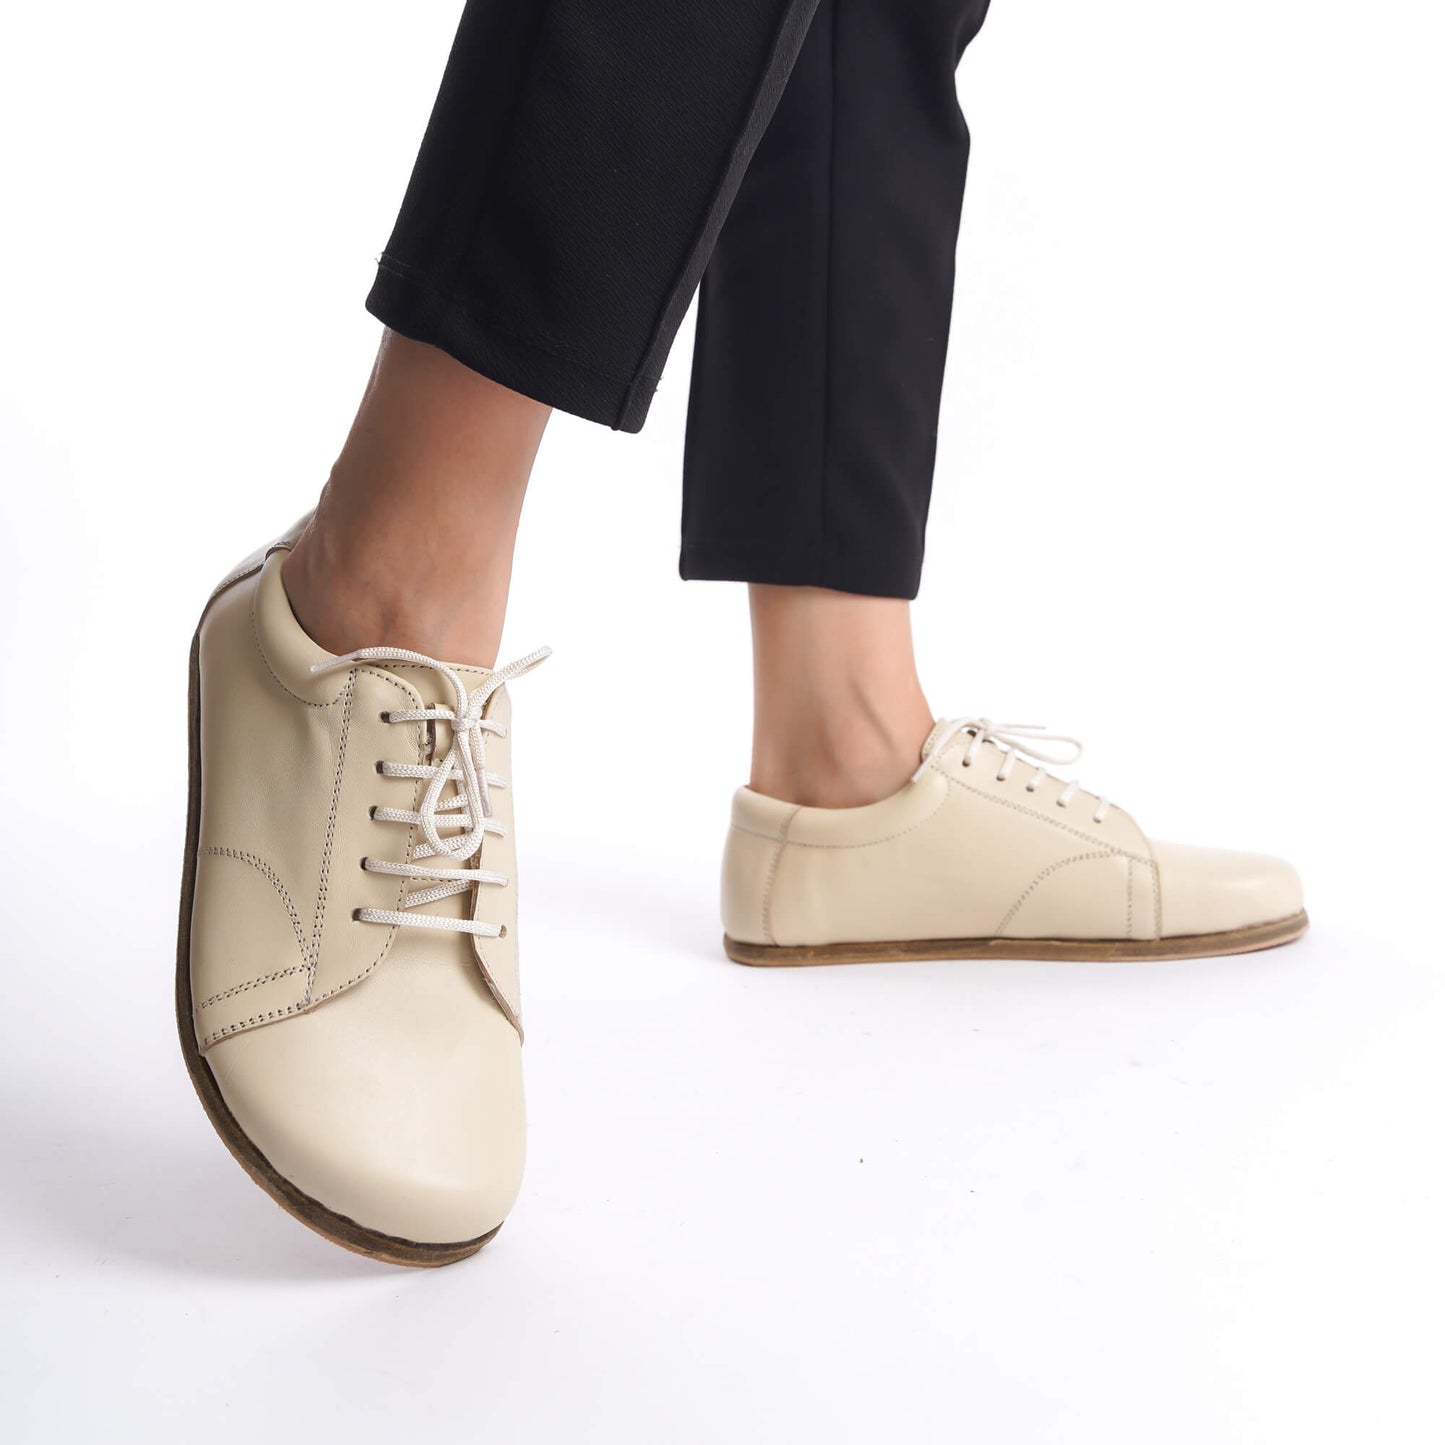 Close-up of model standing in beige leather barefoot women's sneakers, perfect for showcasing flexibility and foot health benefits.